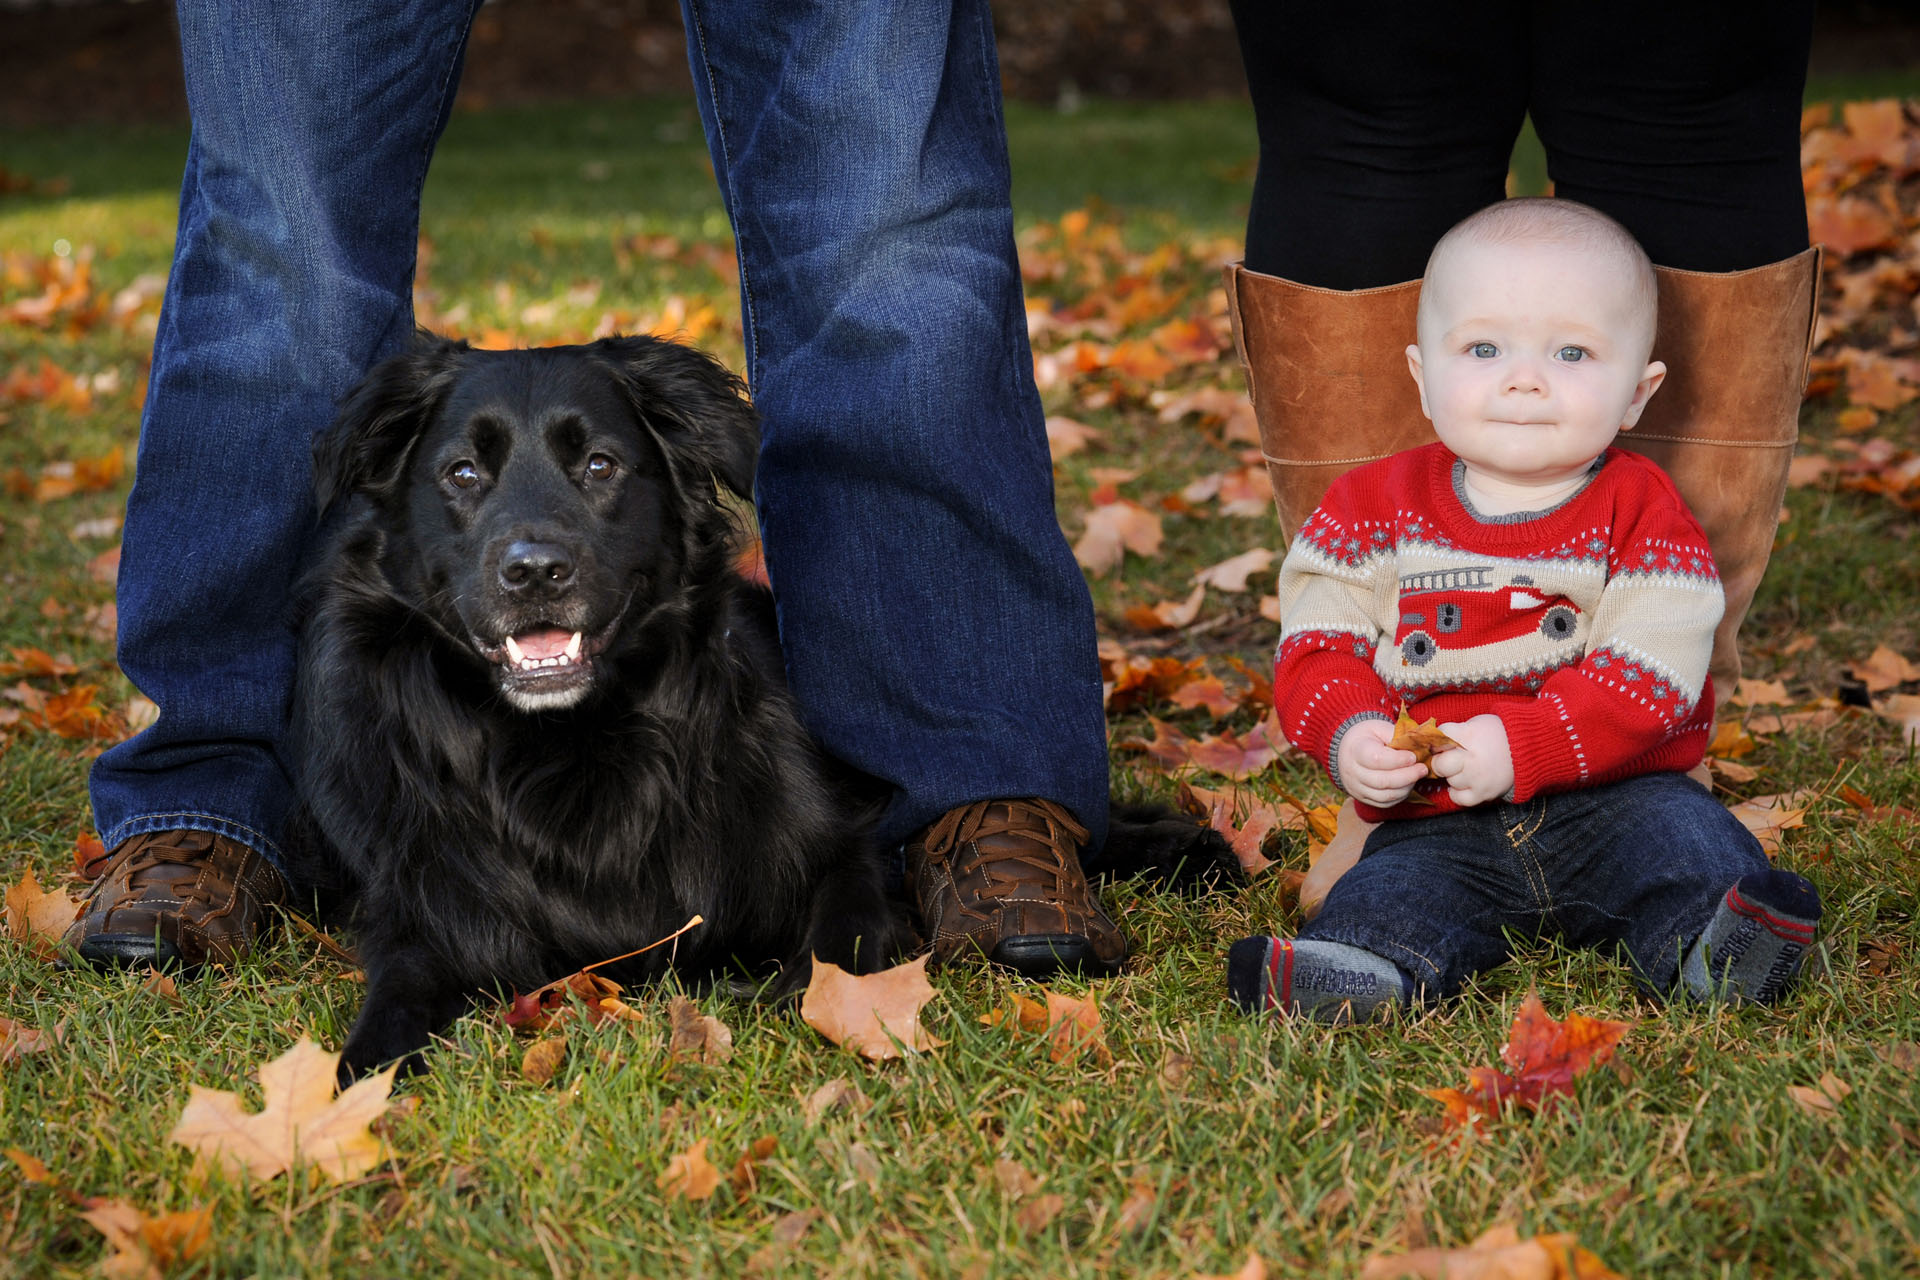 Best Detroit family photographer photographs families and their pets in metro Detroit, Michigan for family photos.